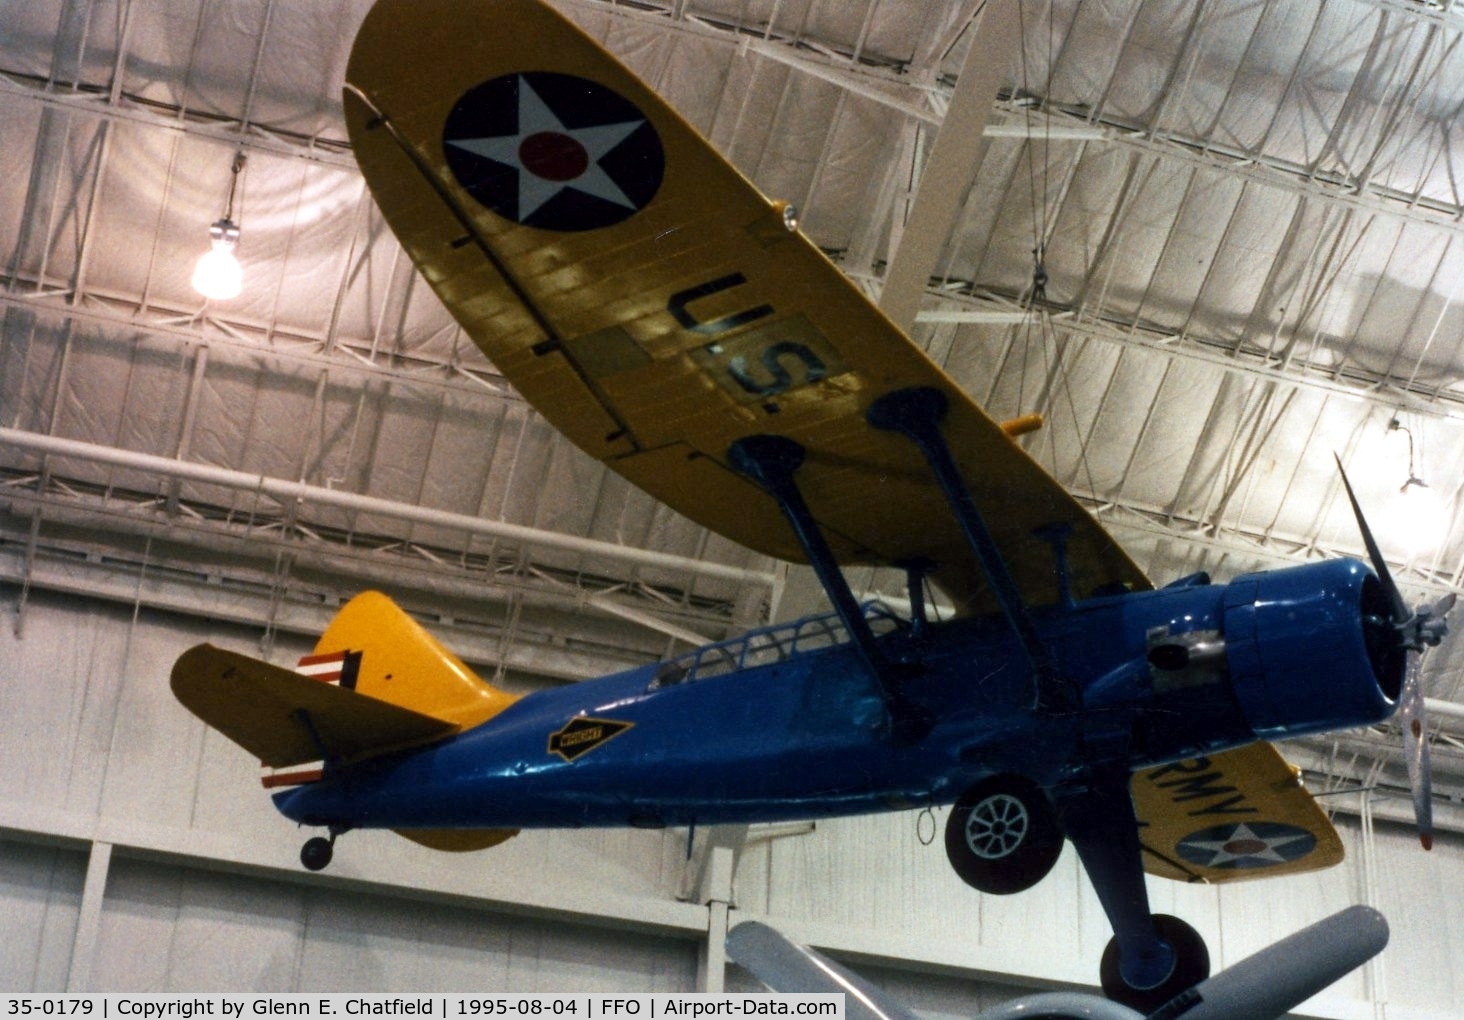 35-0179, 1935 Douglas O-46A C/N 1441, O-46A at the National Museum of the U.S. Air Force